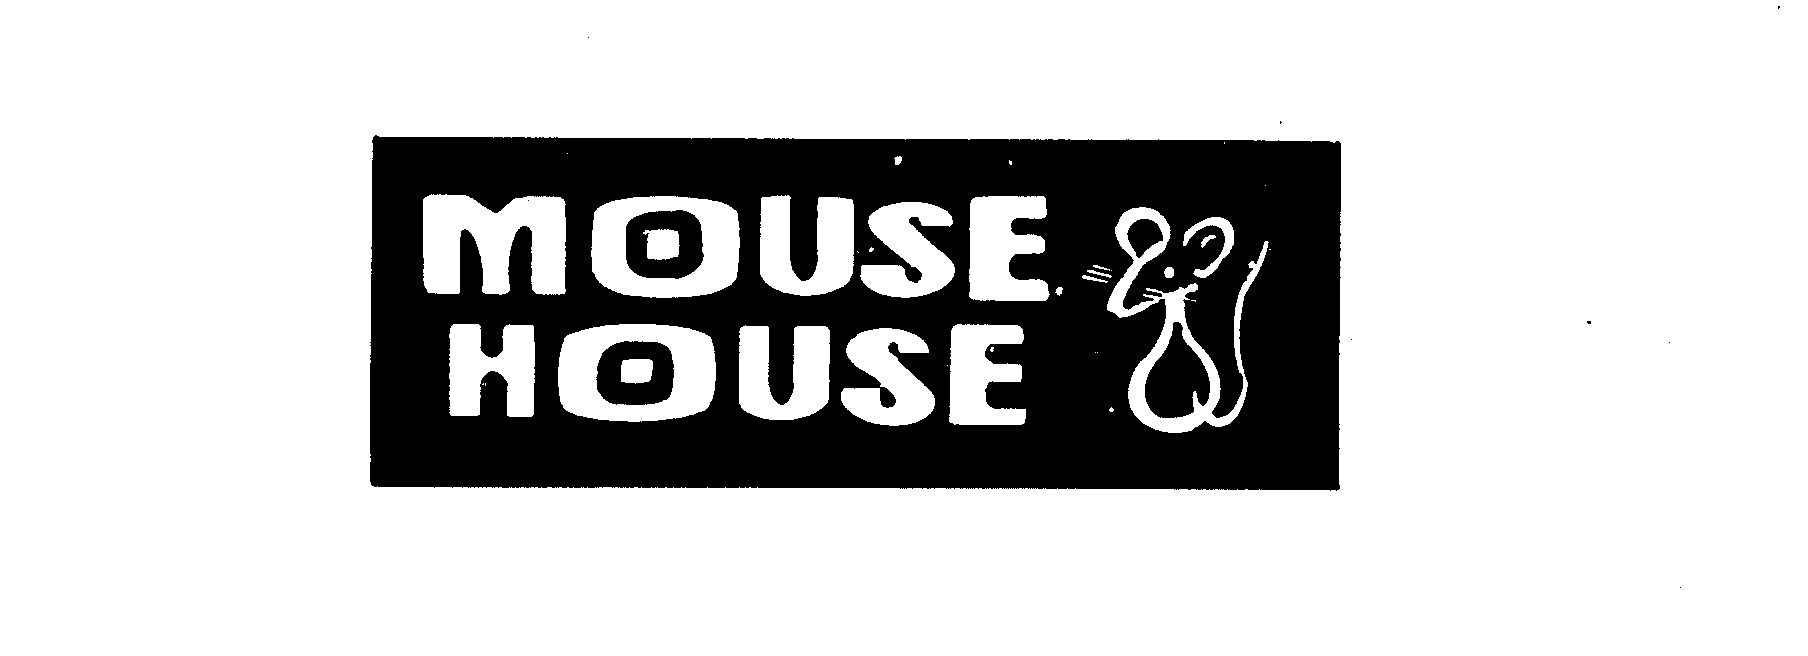  MOUSE HOUSE